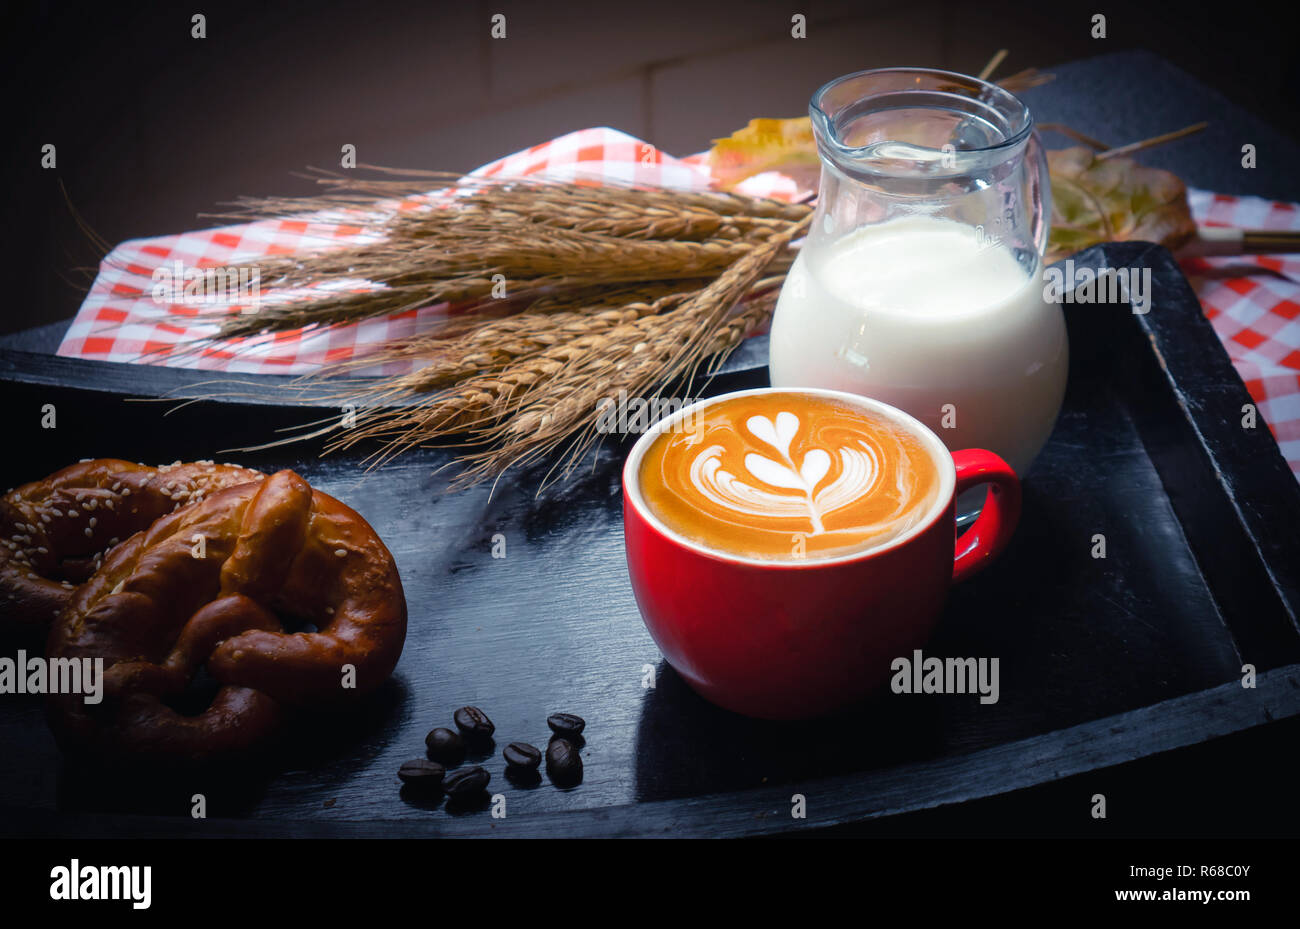 Breakfast with bread,latte art and milk on plate Stock Photo